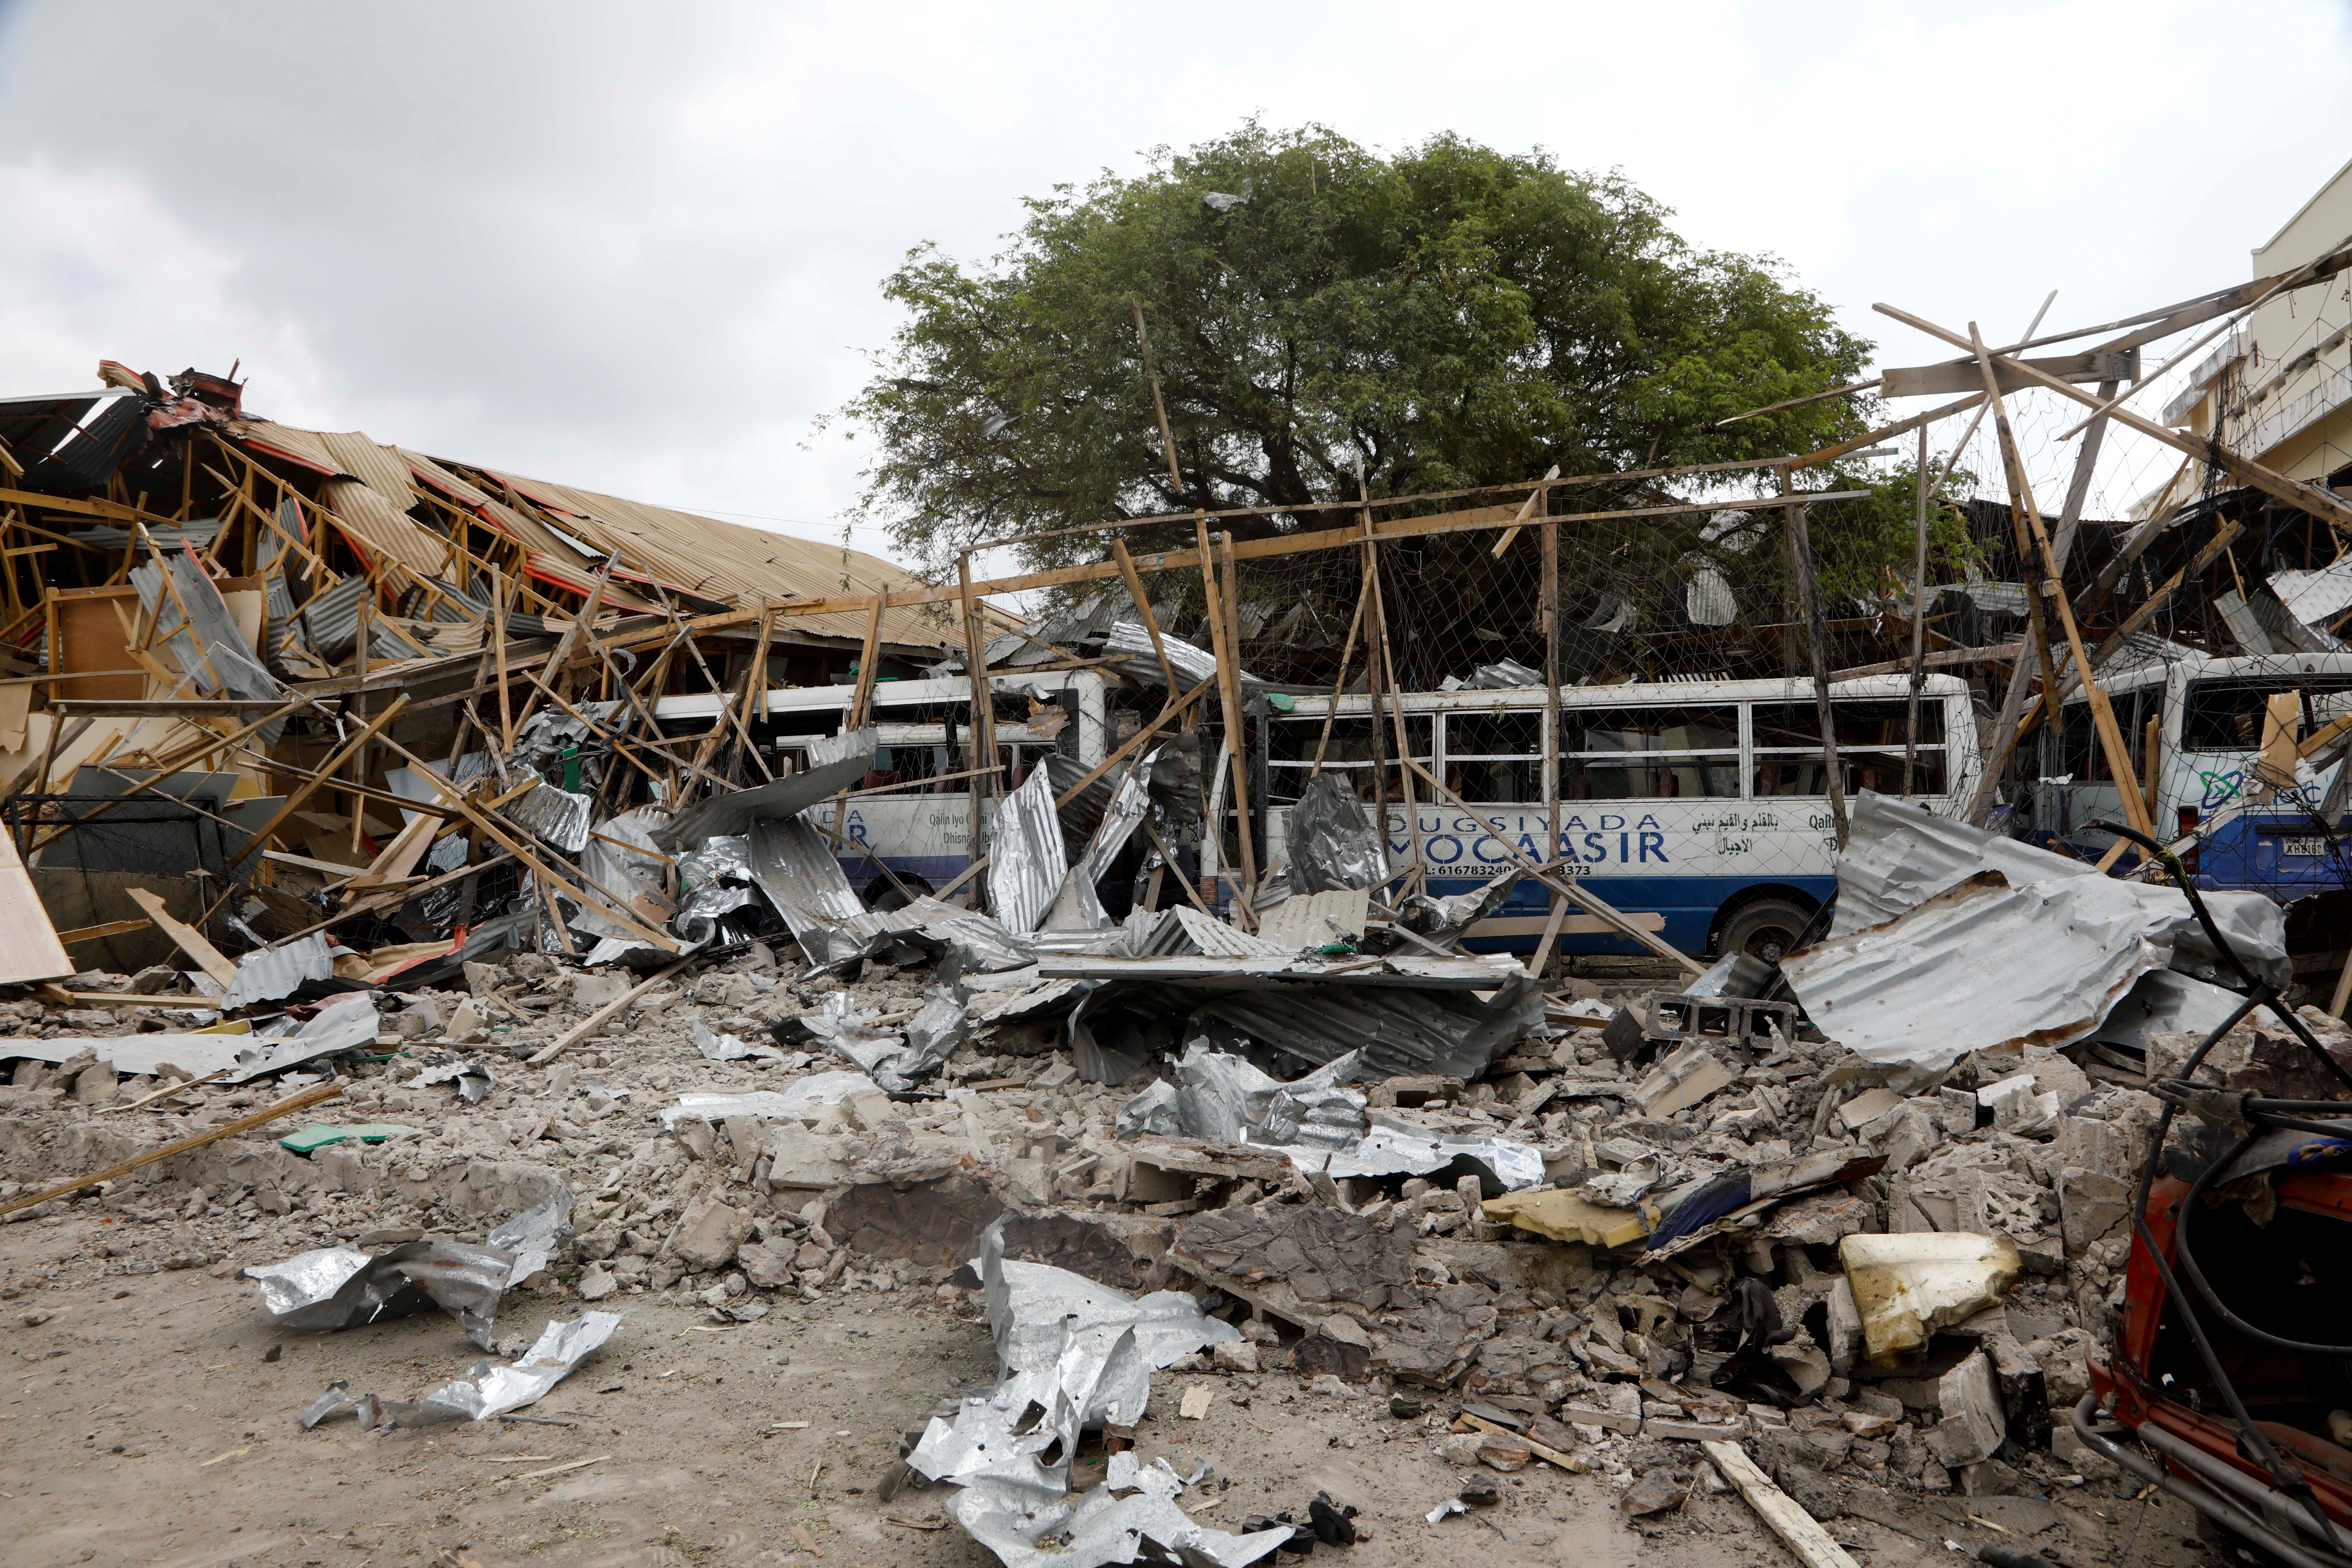 A view shows the damaged structures and school buses at the scene after a car exploded in a suicide attack near Mucassar primary and secondary school in Hodan district of Mogadishu